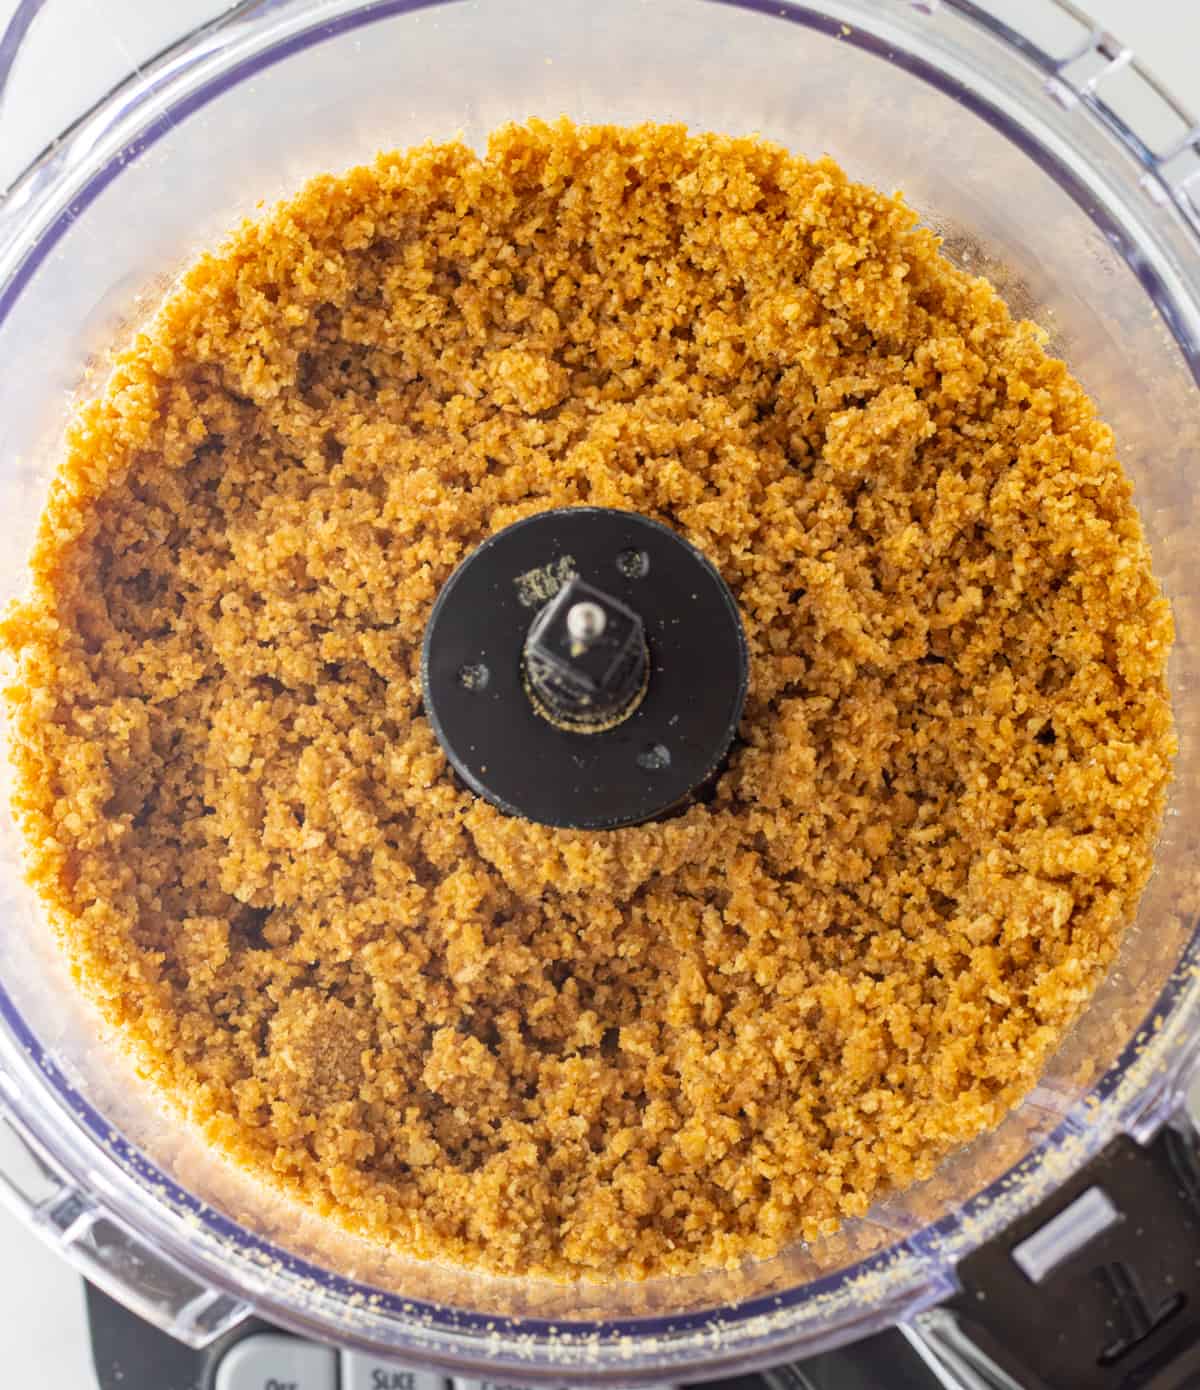 Graham cracker crumbs mixed with melted butter in a food processor.